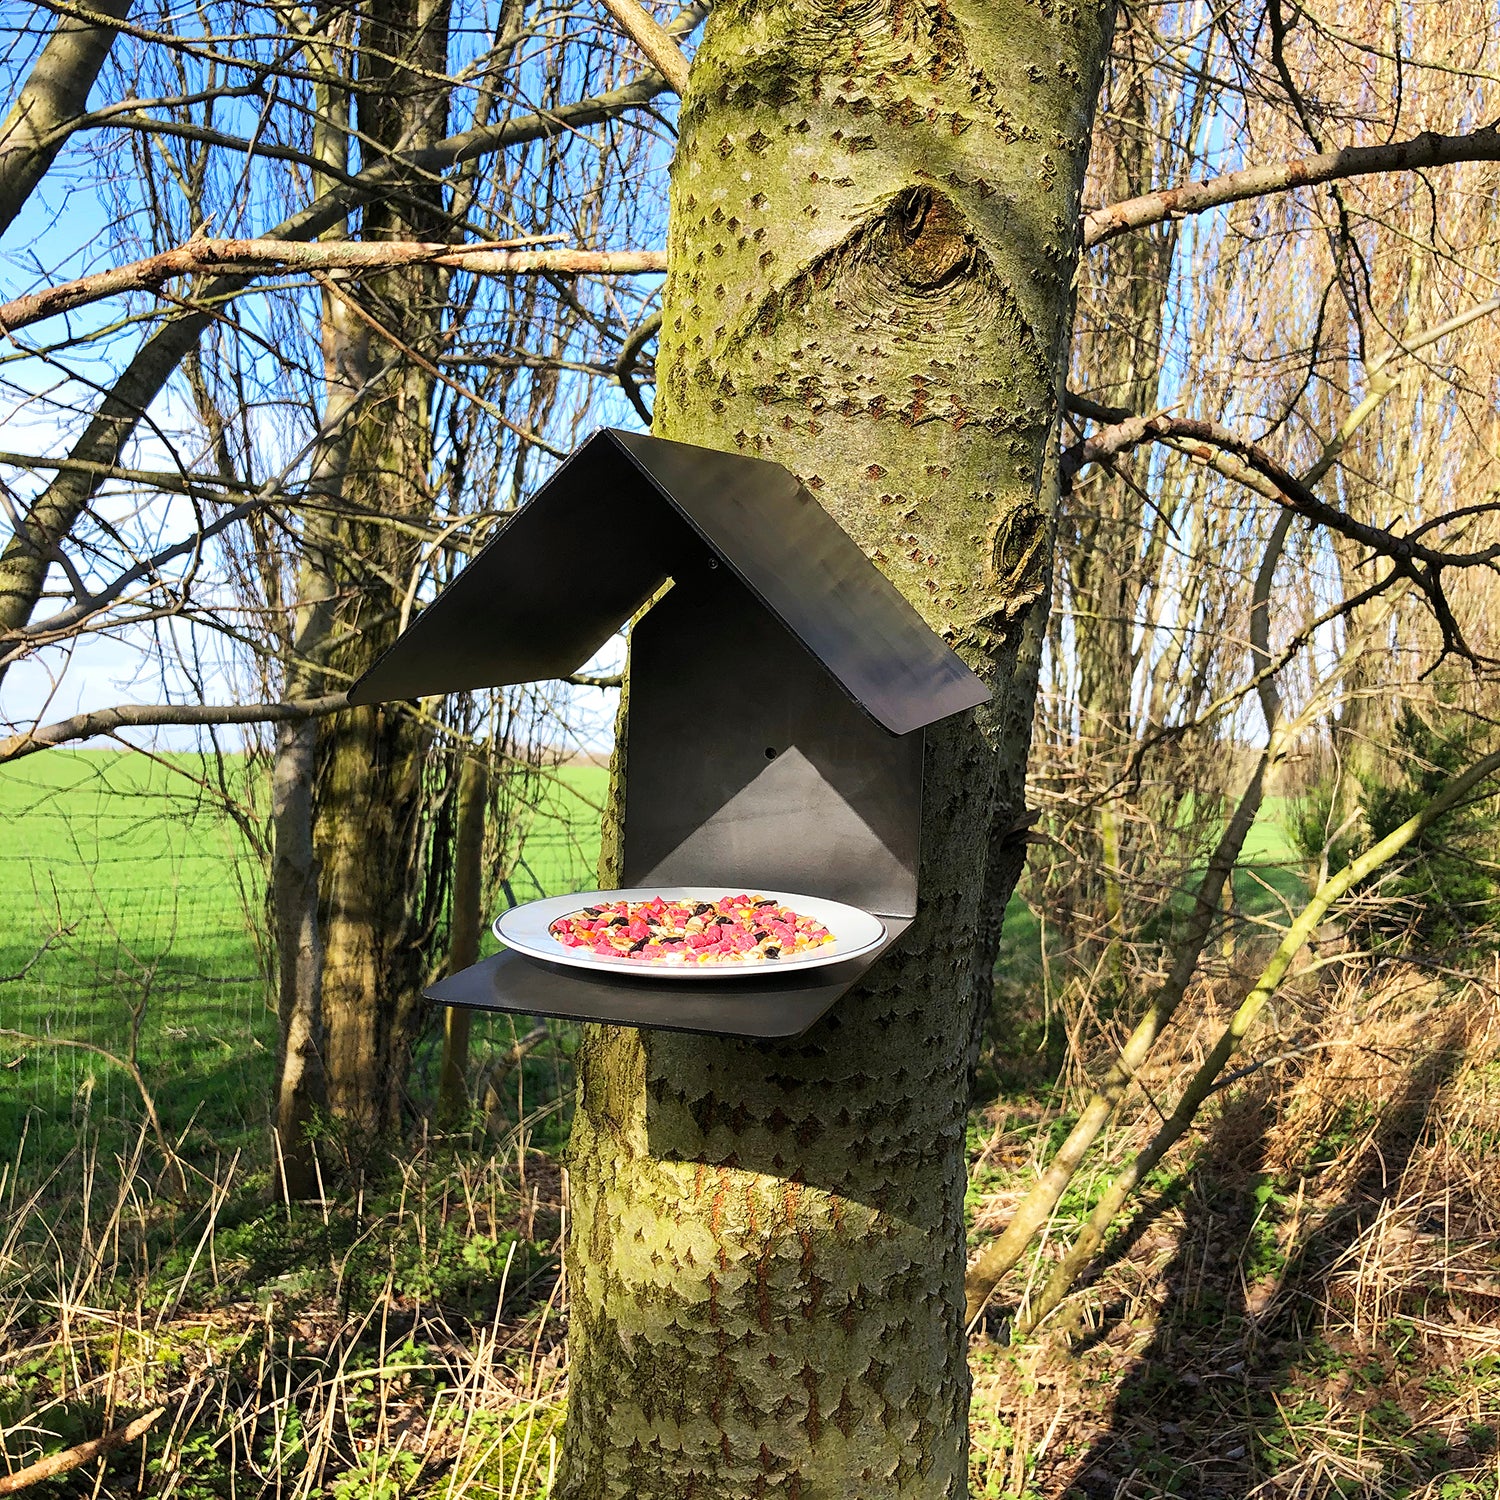 distance view of the bird feeder mounted to a tree